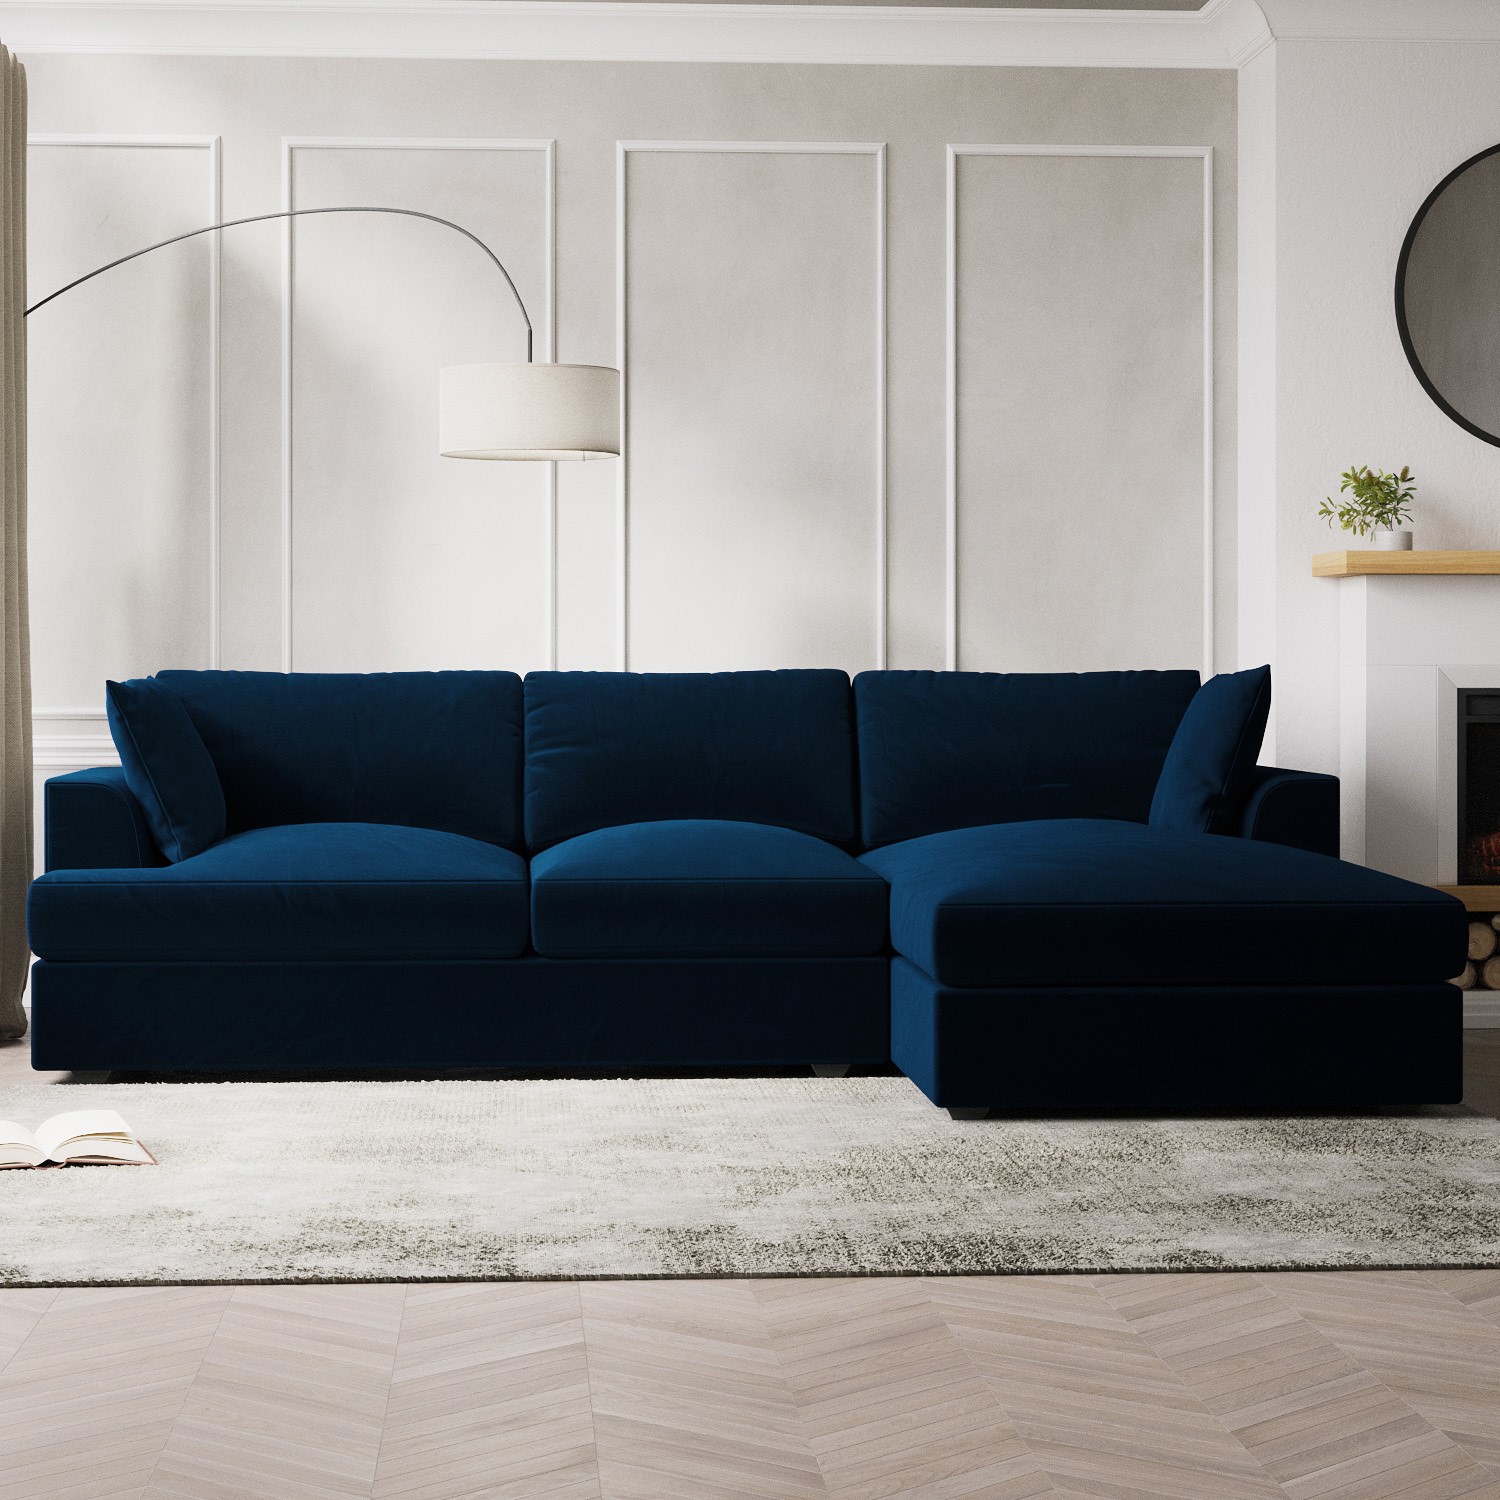 Read more about Large navy velvet right hand facing l shaped sofa seats 4 august